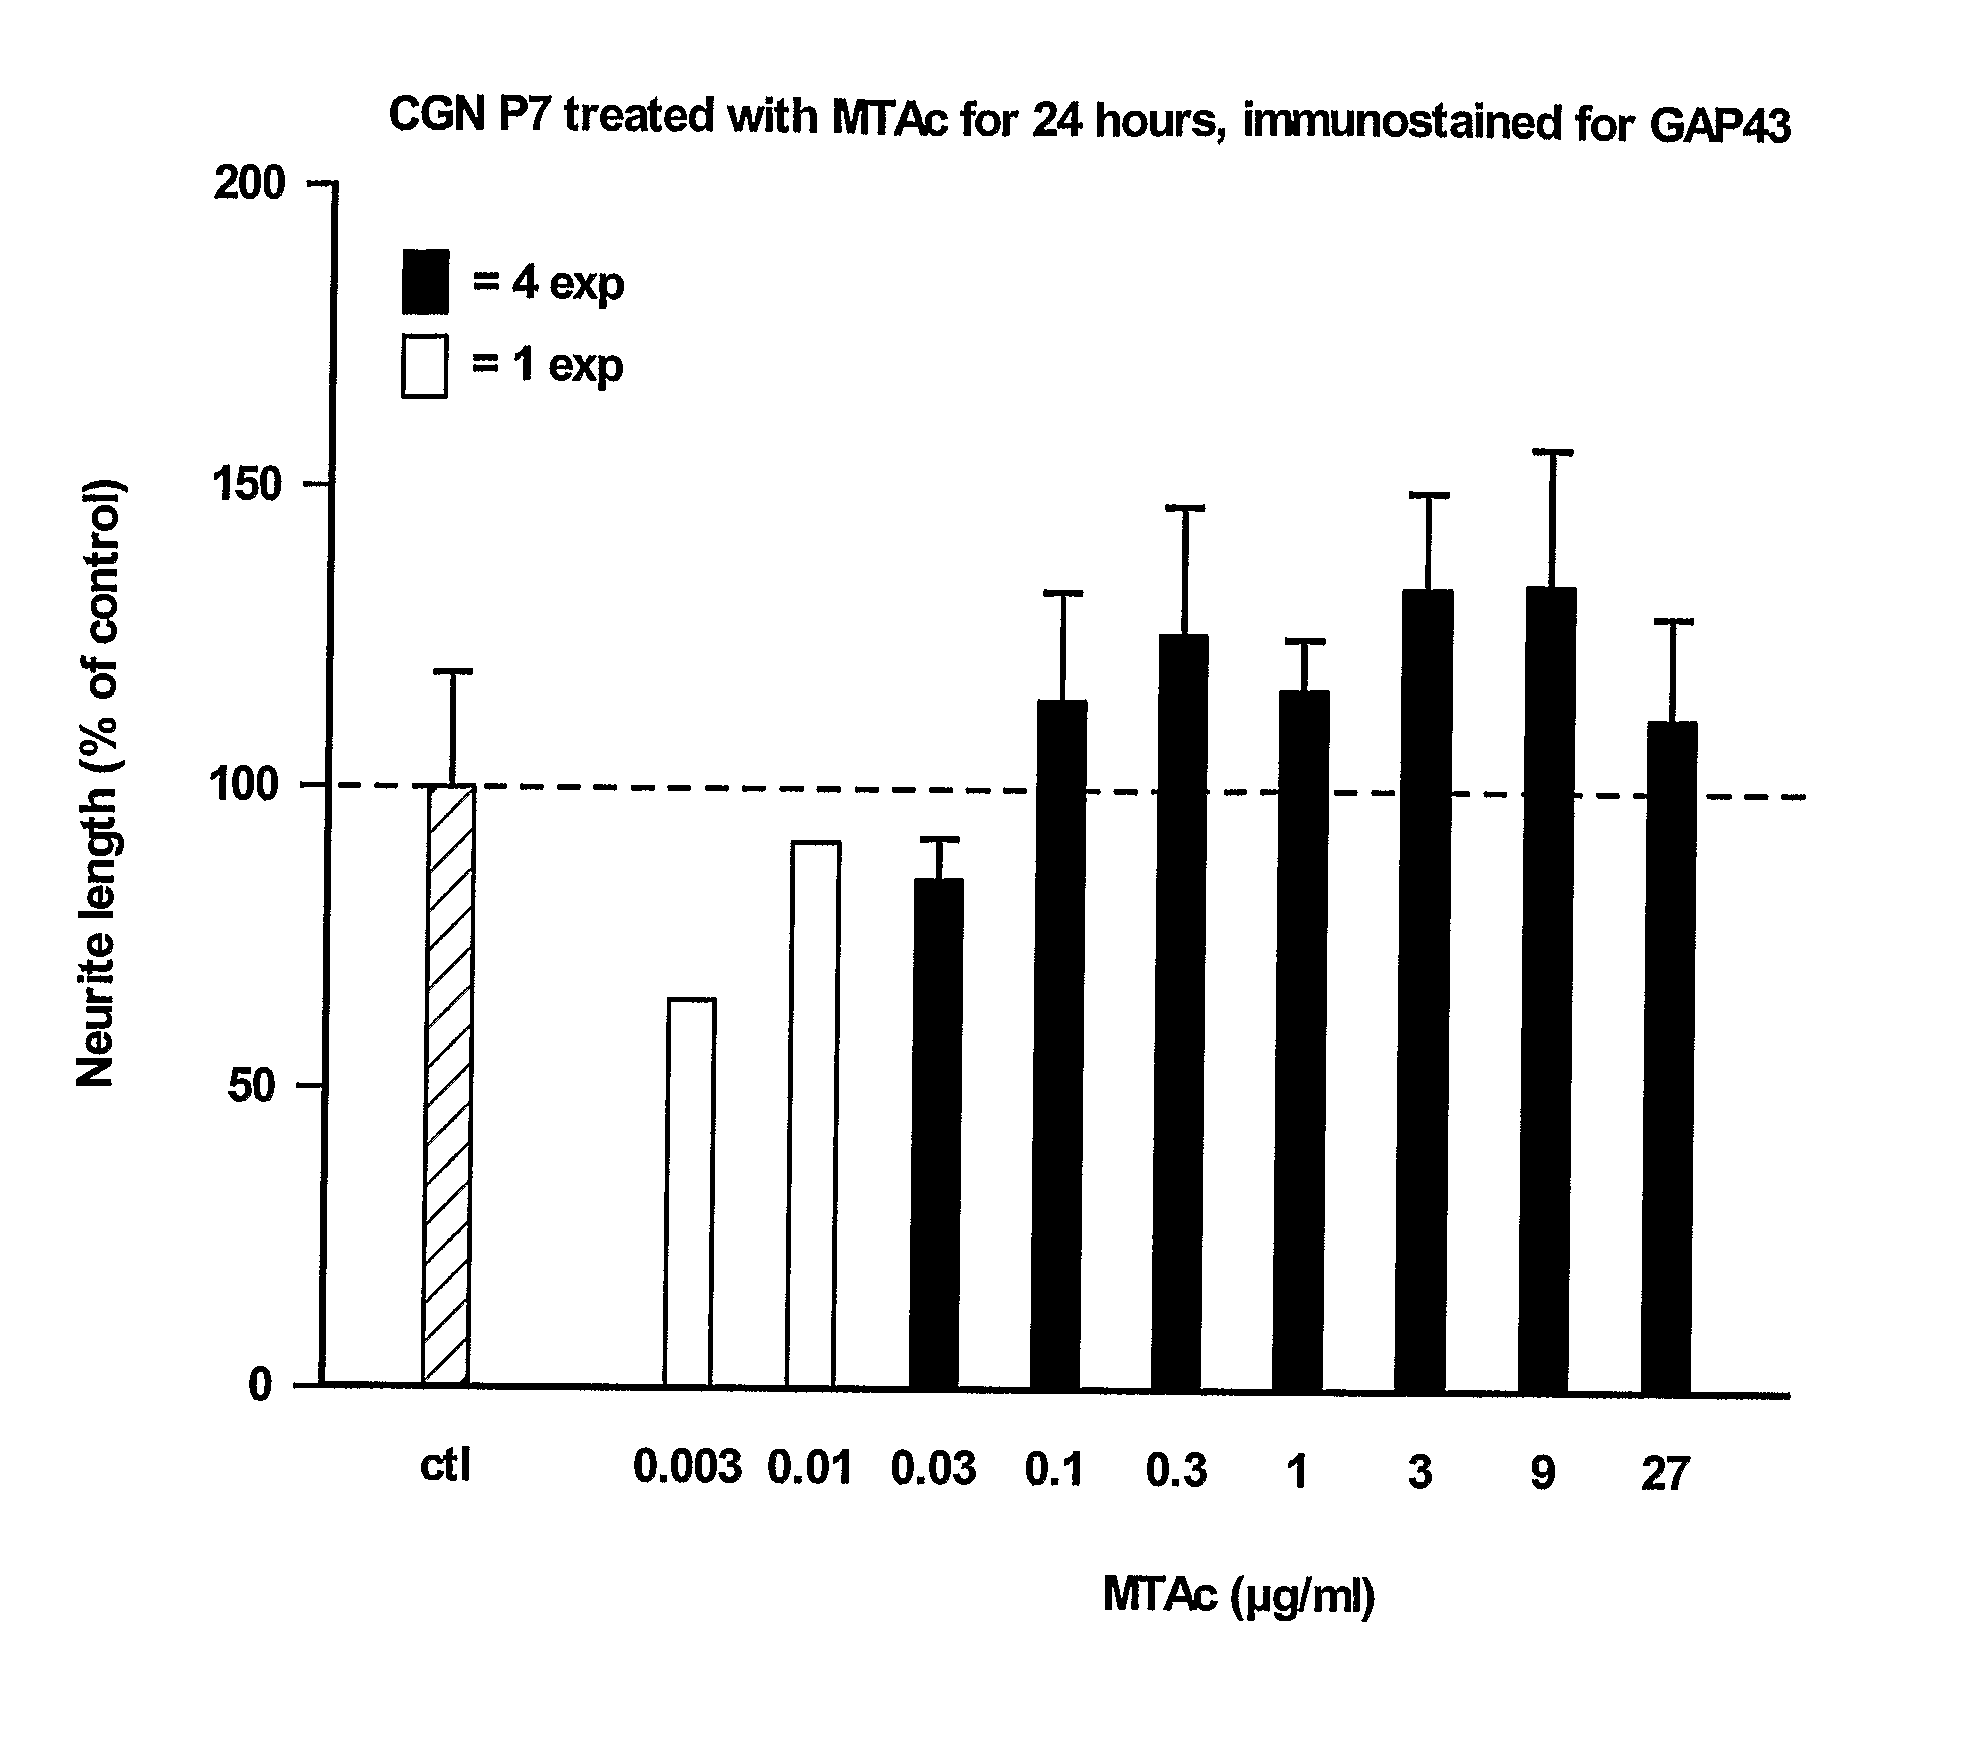 Metallothionein-Derived Peptide Fragments